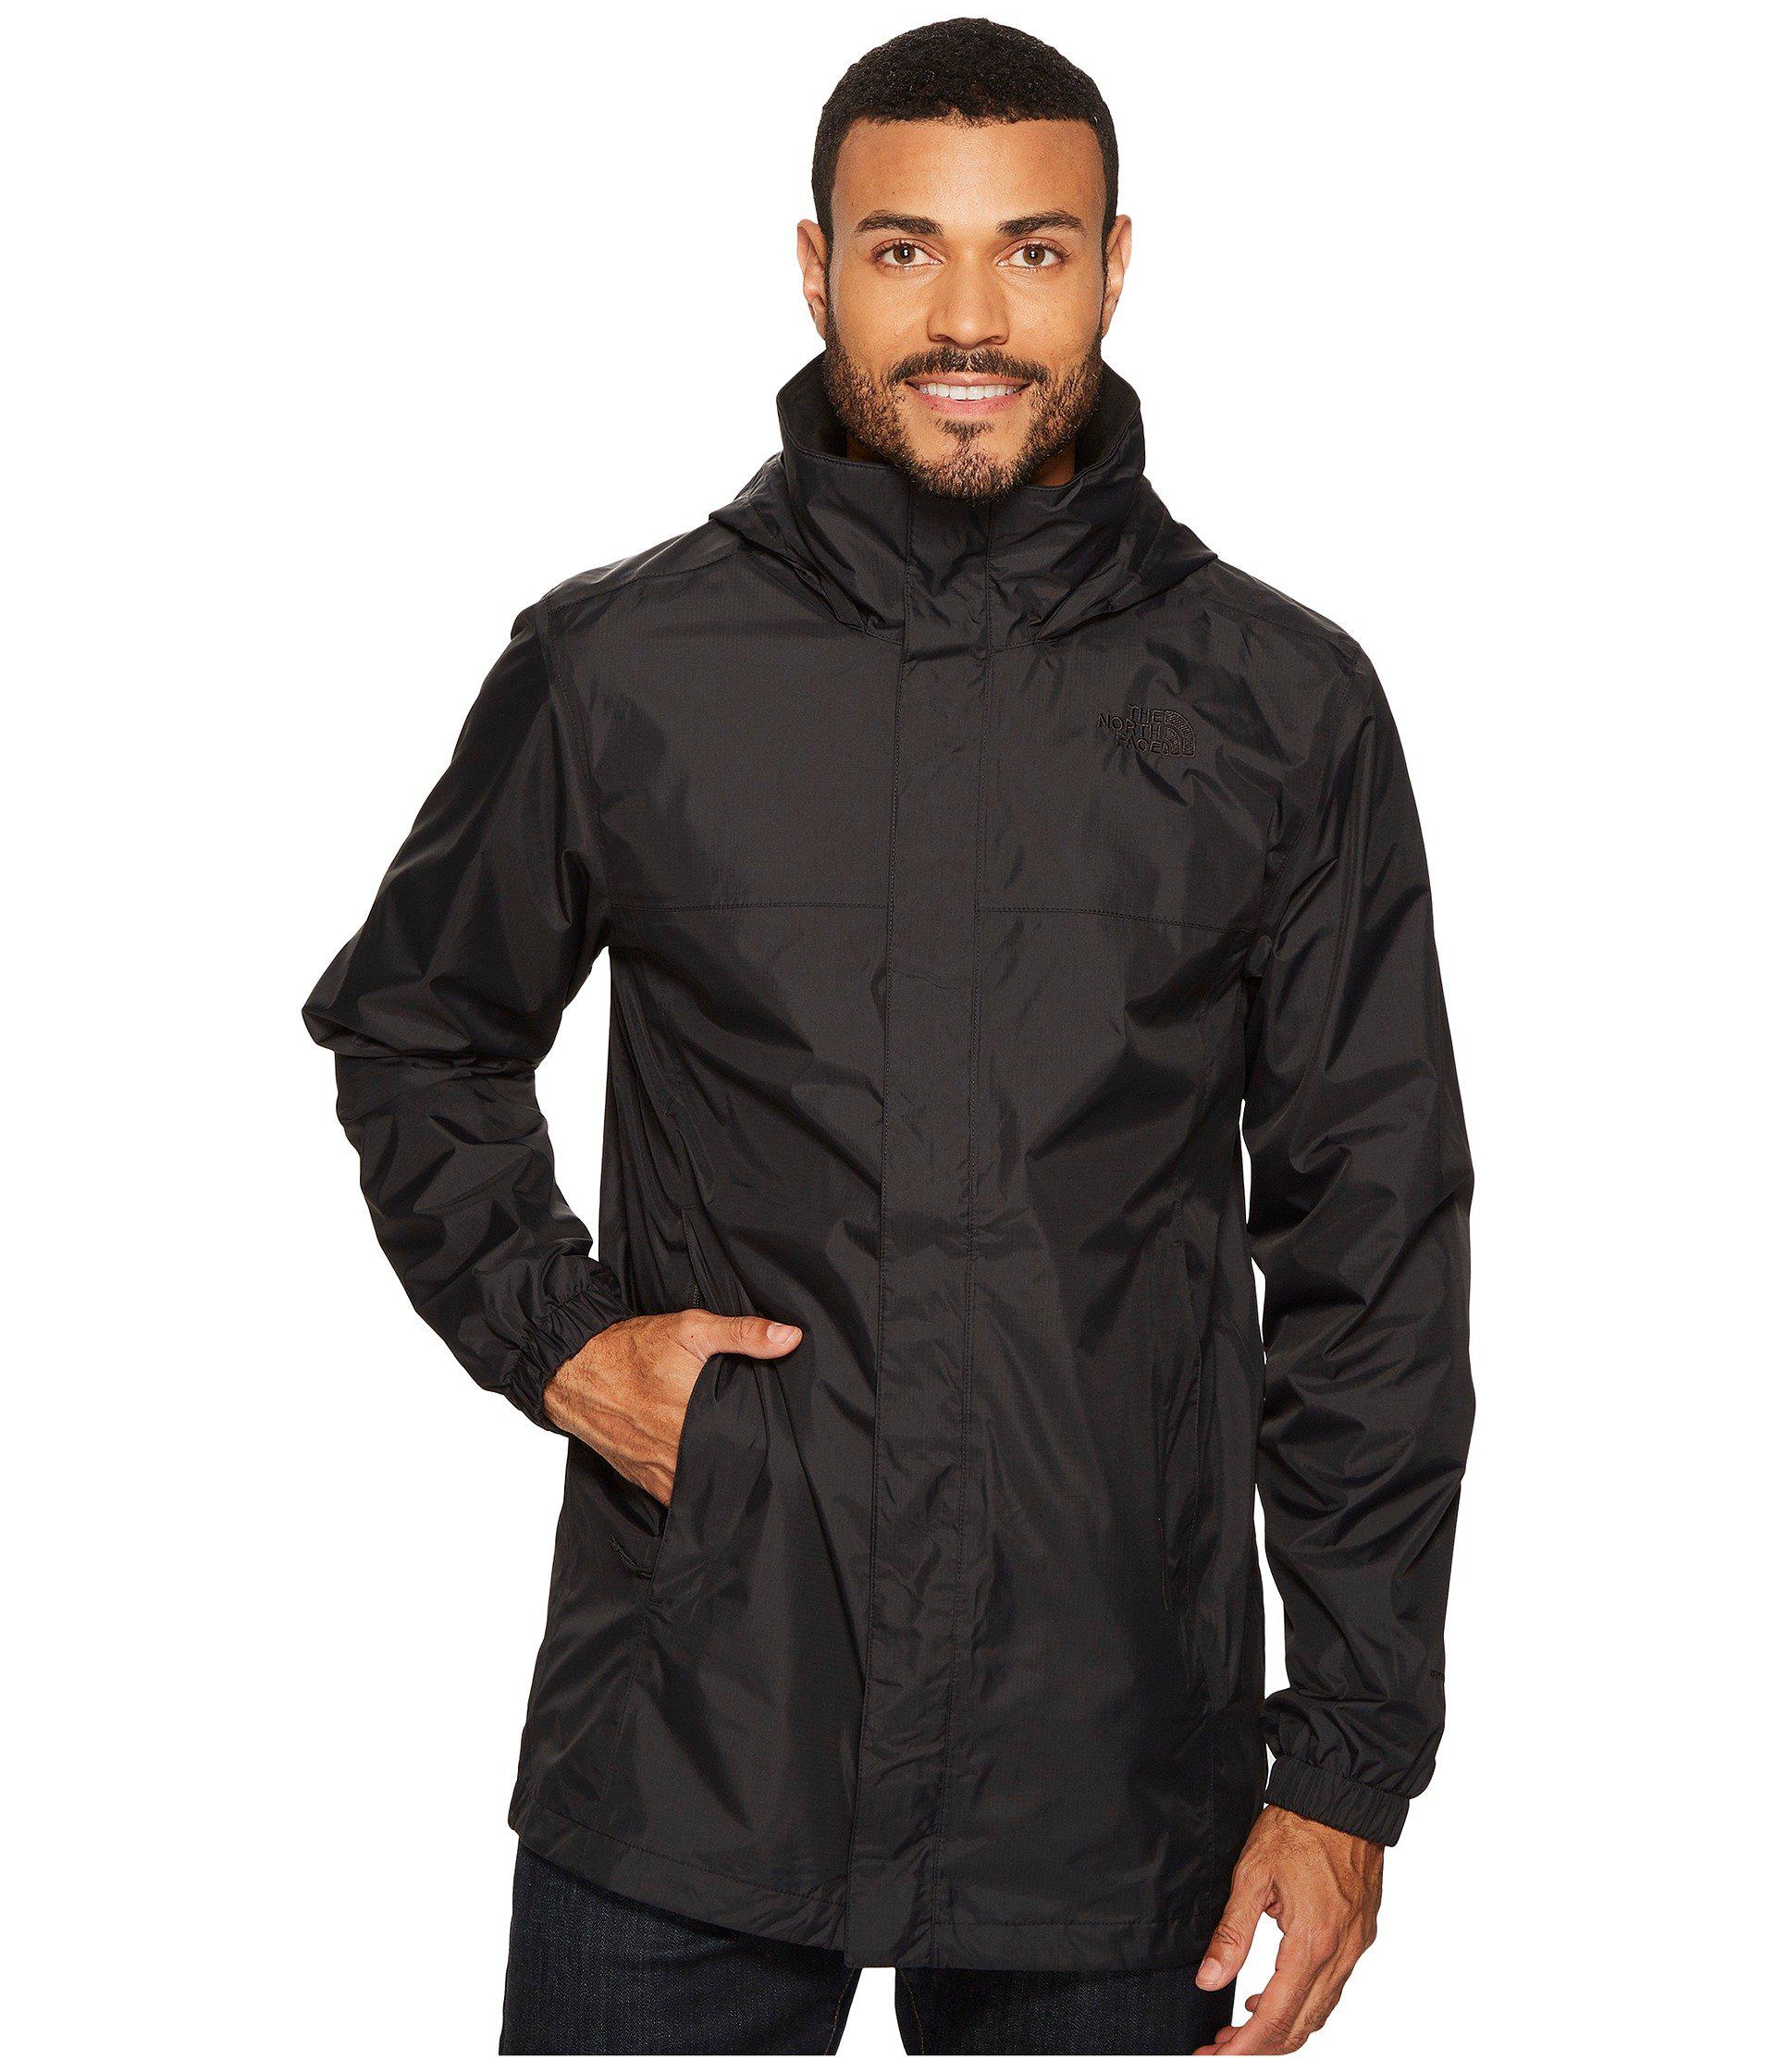 The North Face Synthetic Resolve Parka in Black for Men - Lyst